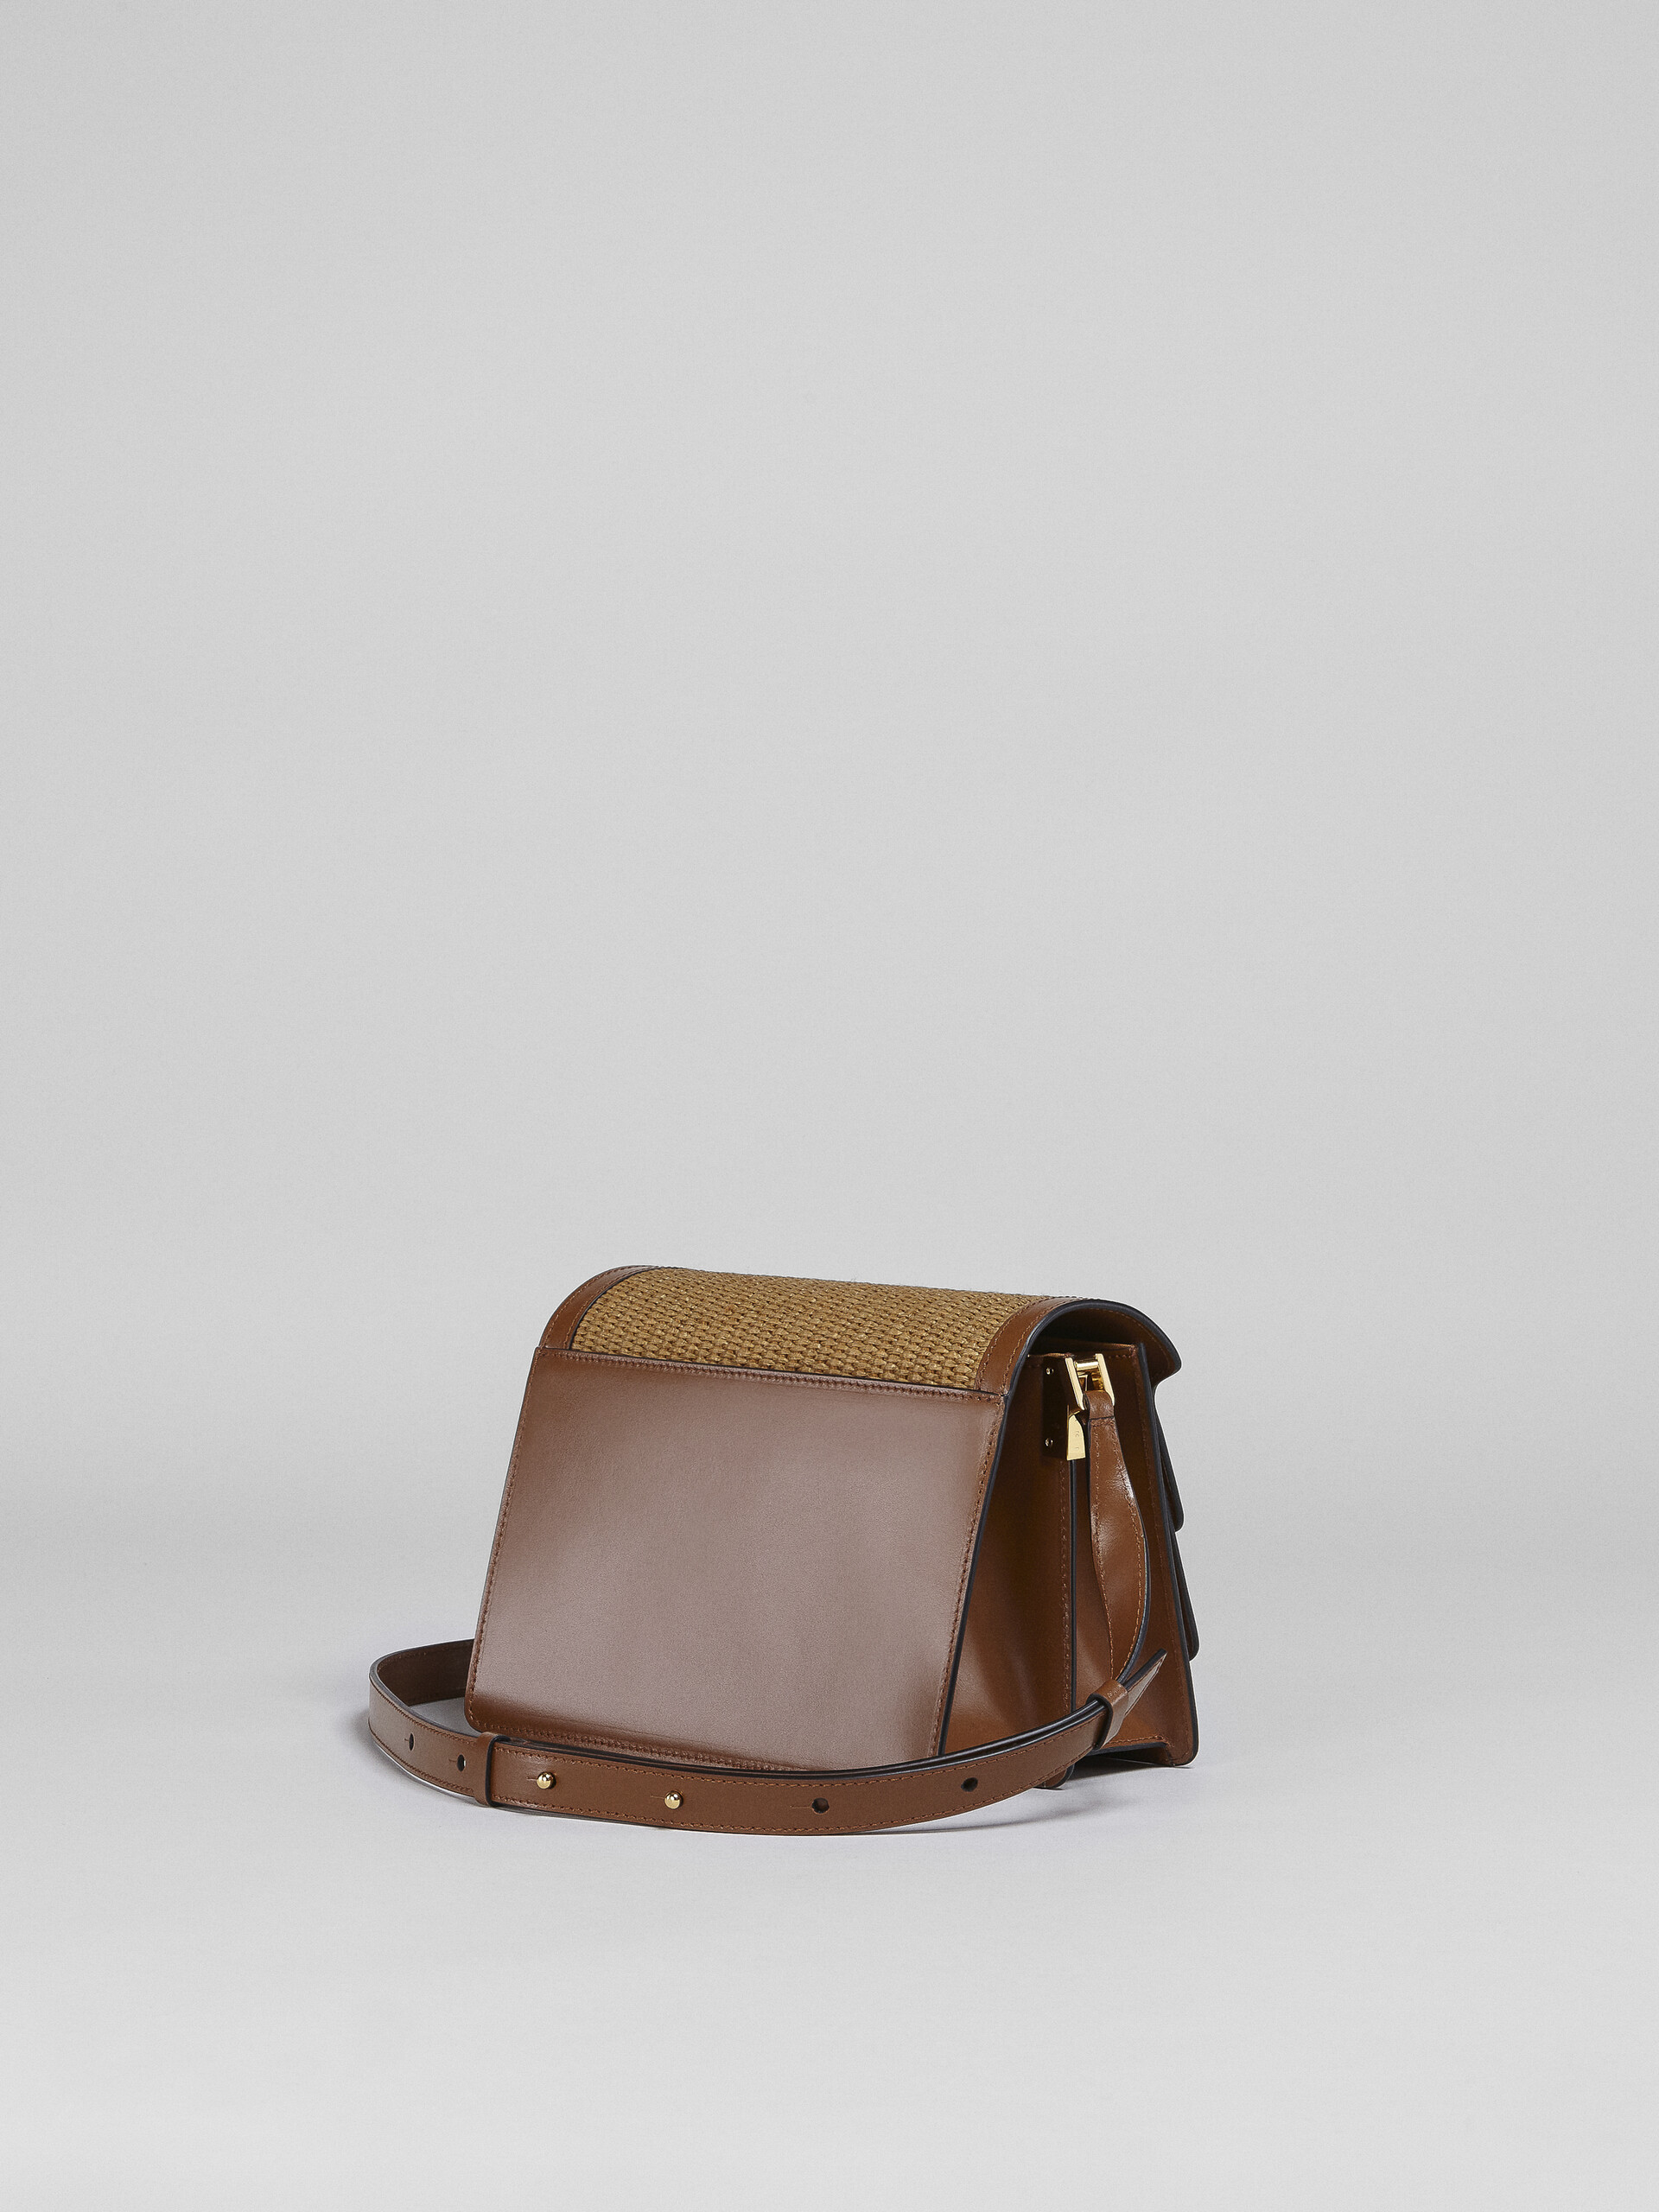 TRUNK SOFT medium bag in brown leather and raffia - Shoulder Bags - Image 3